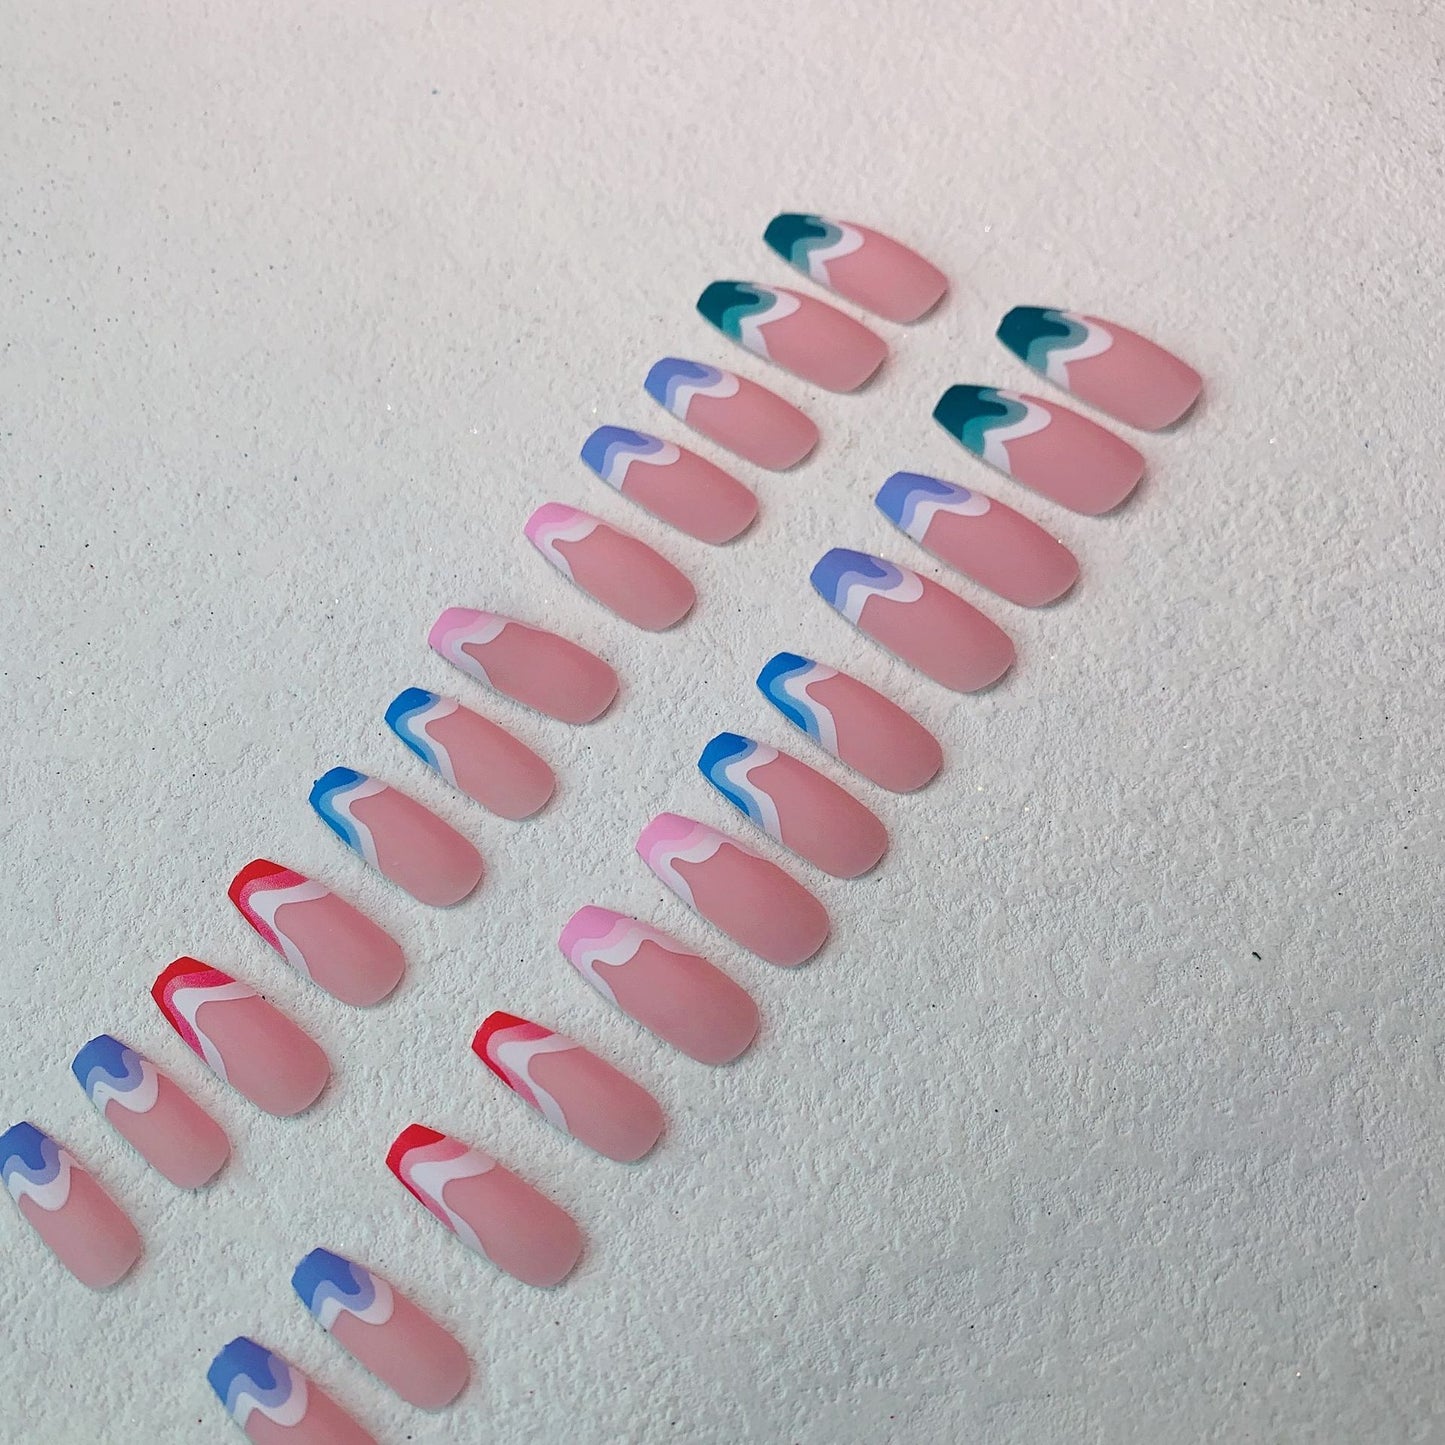 Fake Nails Multicolored Wave Pattern Extra Long Ballerina Frosted Nail Art